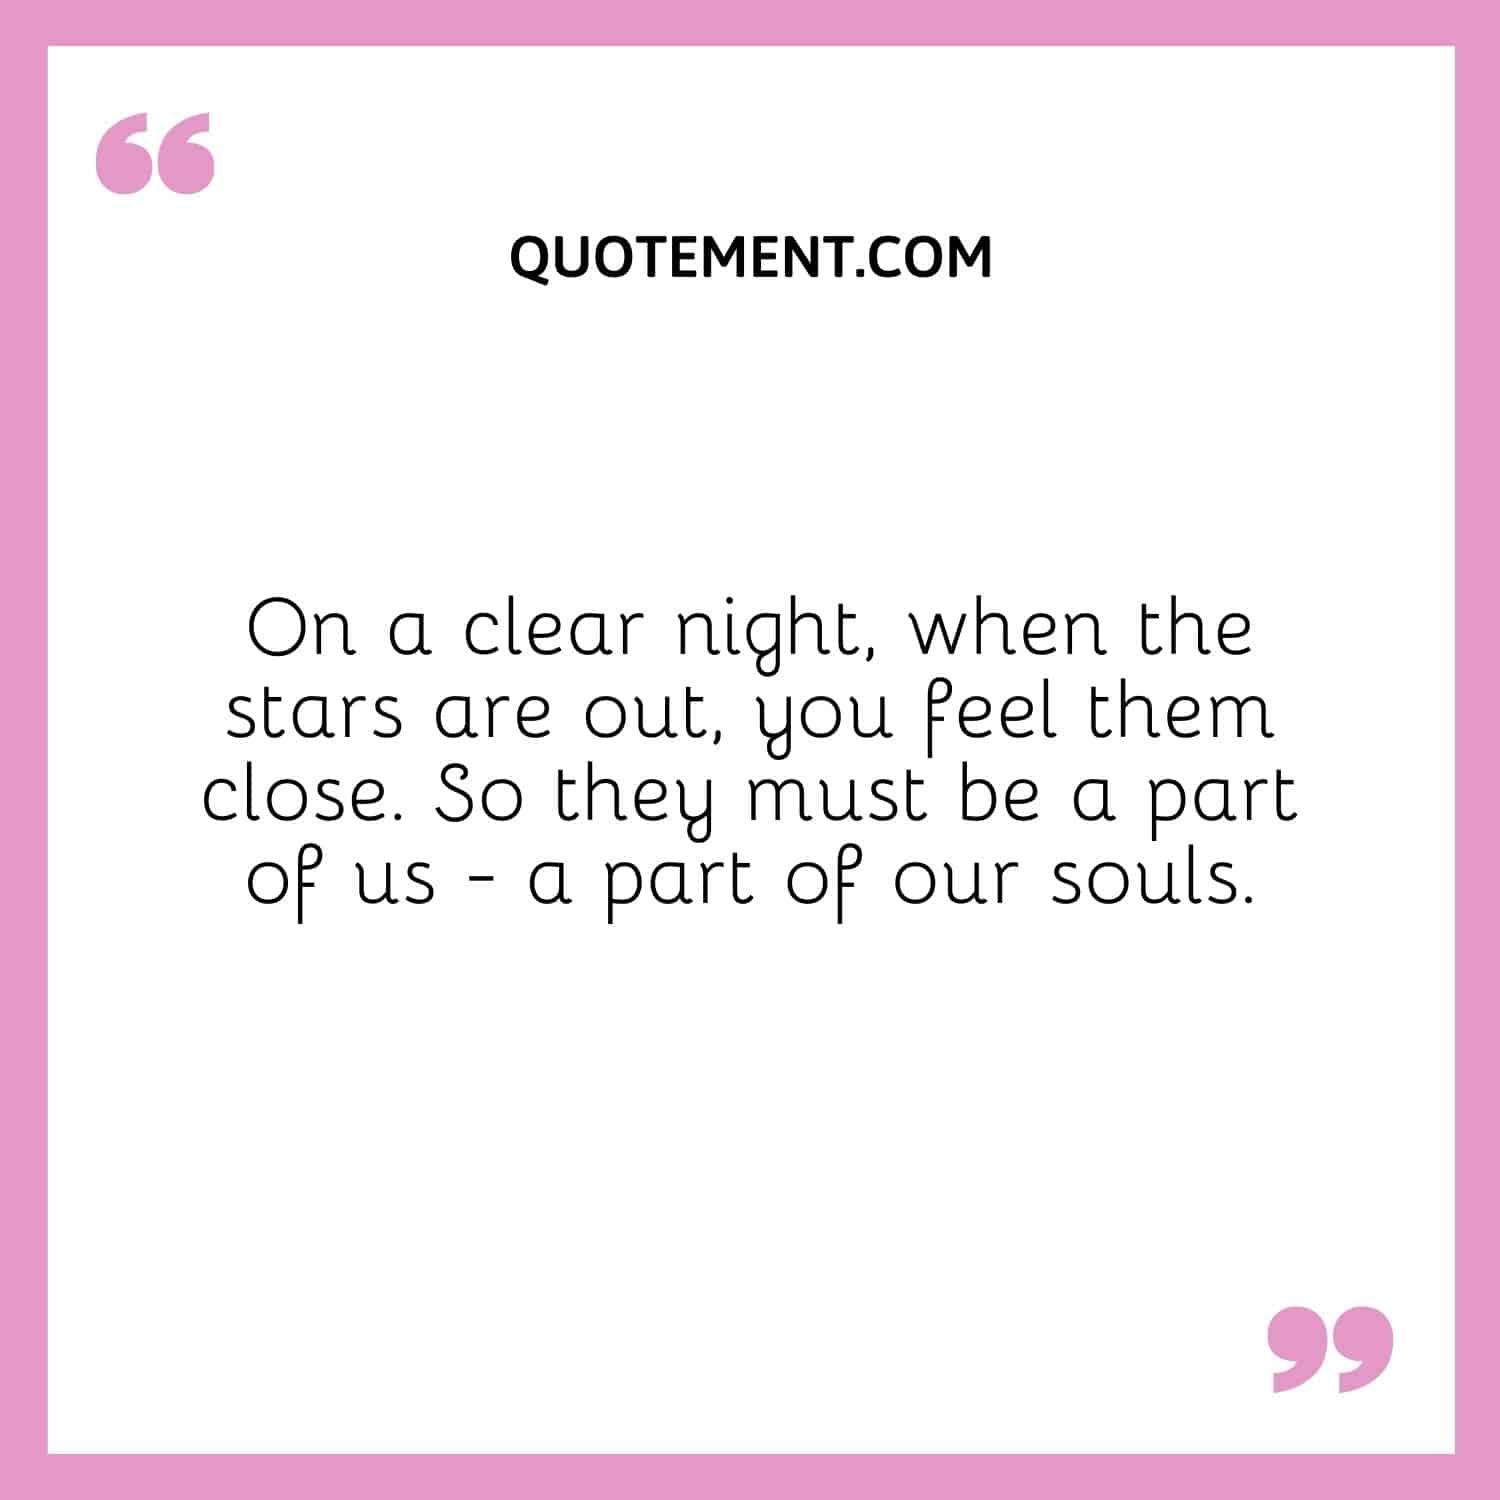 On a clear night, when the stars are out, you feel them close. So they must be a part of us - a part of our souls.